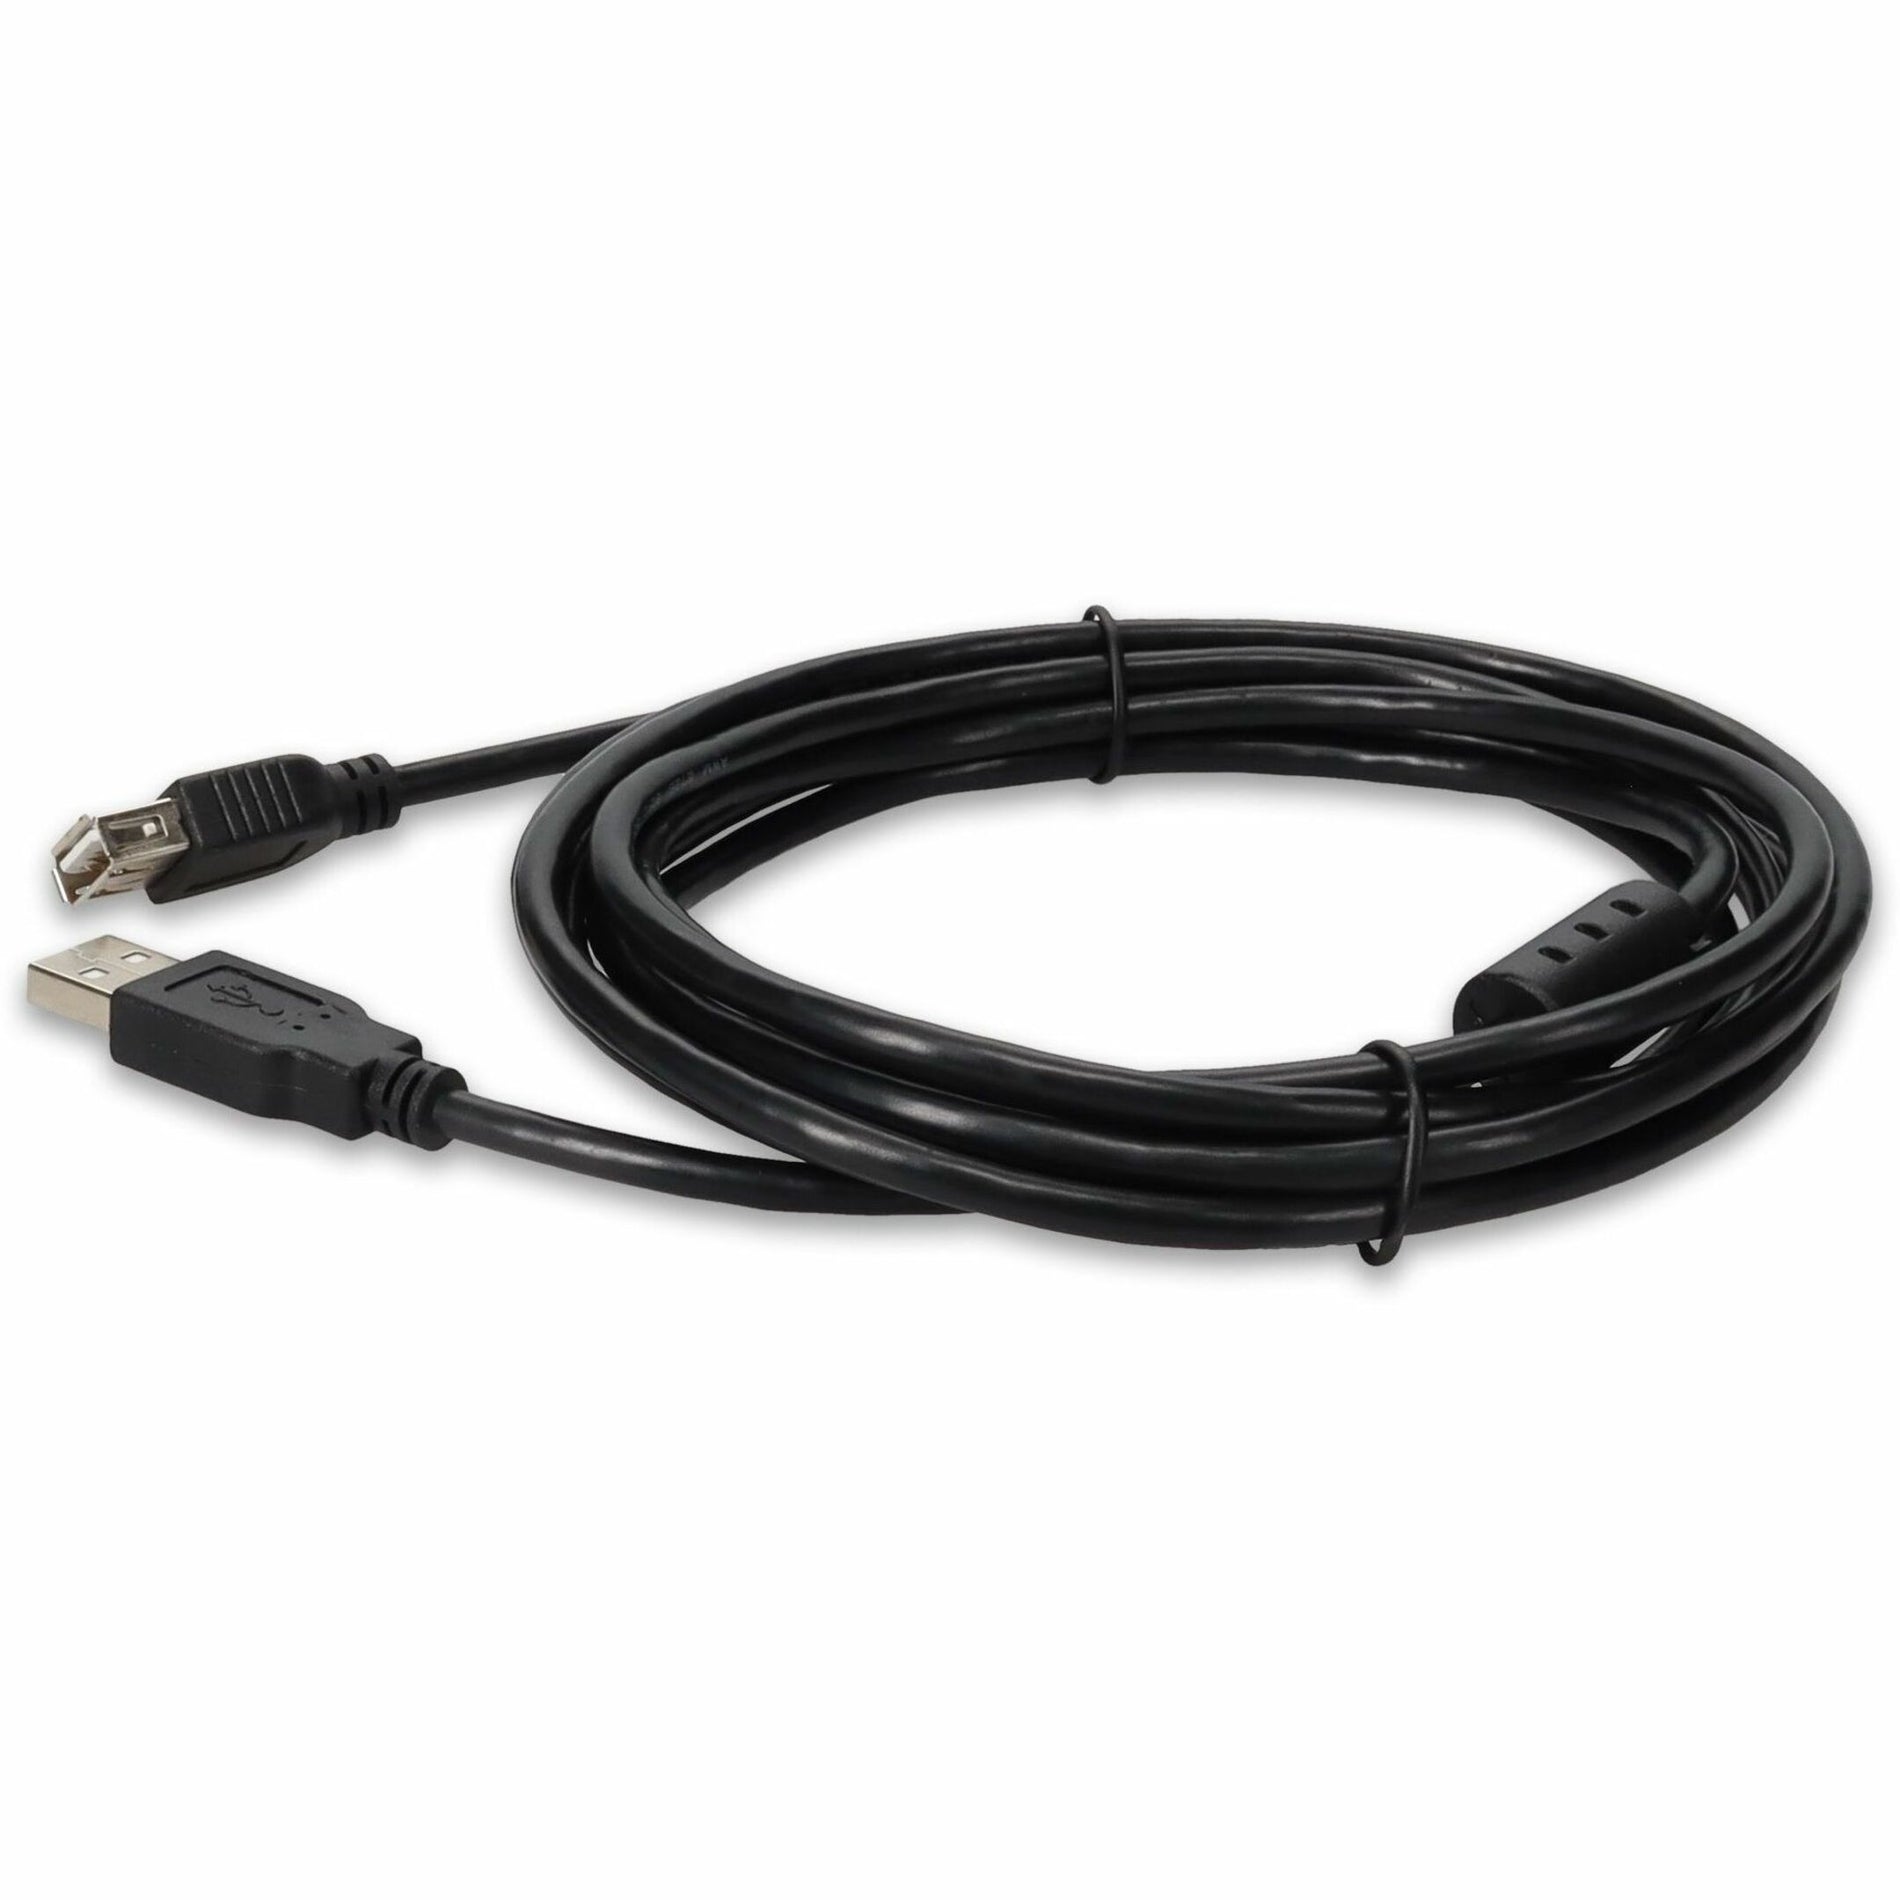 USBEXTAA10FB 10ft (3M) USB 2.0 A to A Extension Cable - Male to Female Black